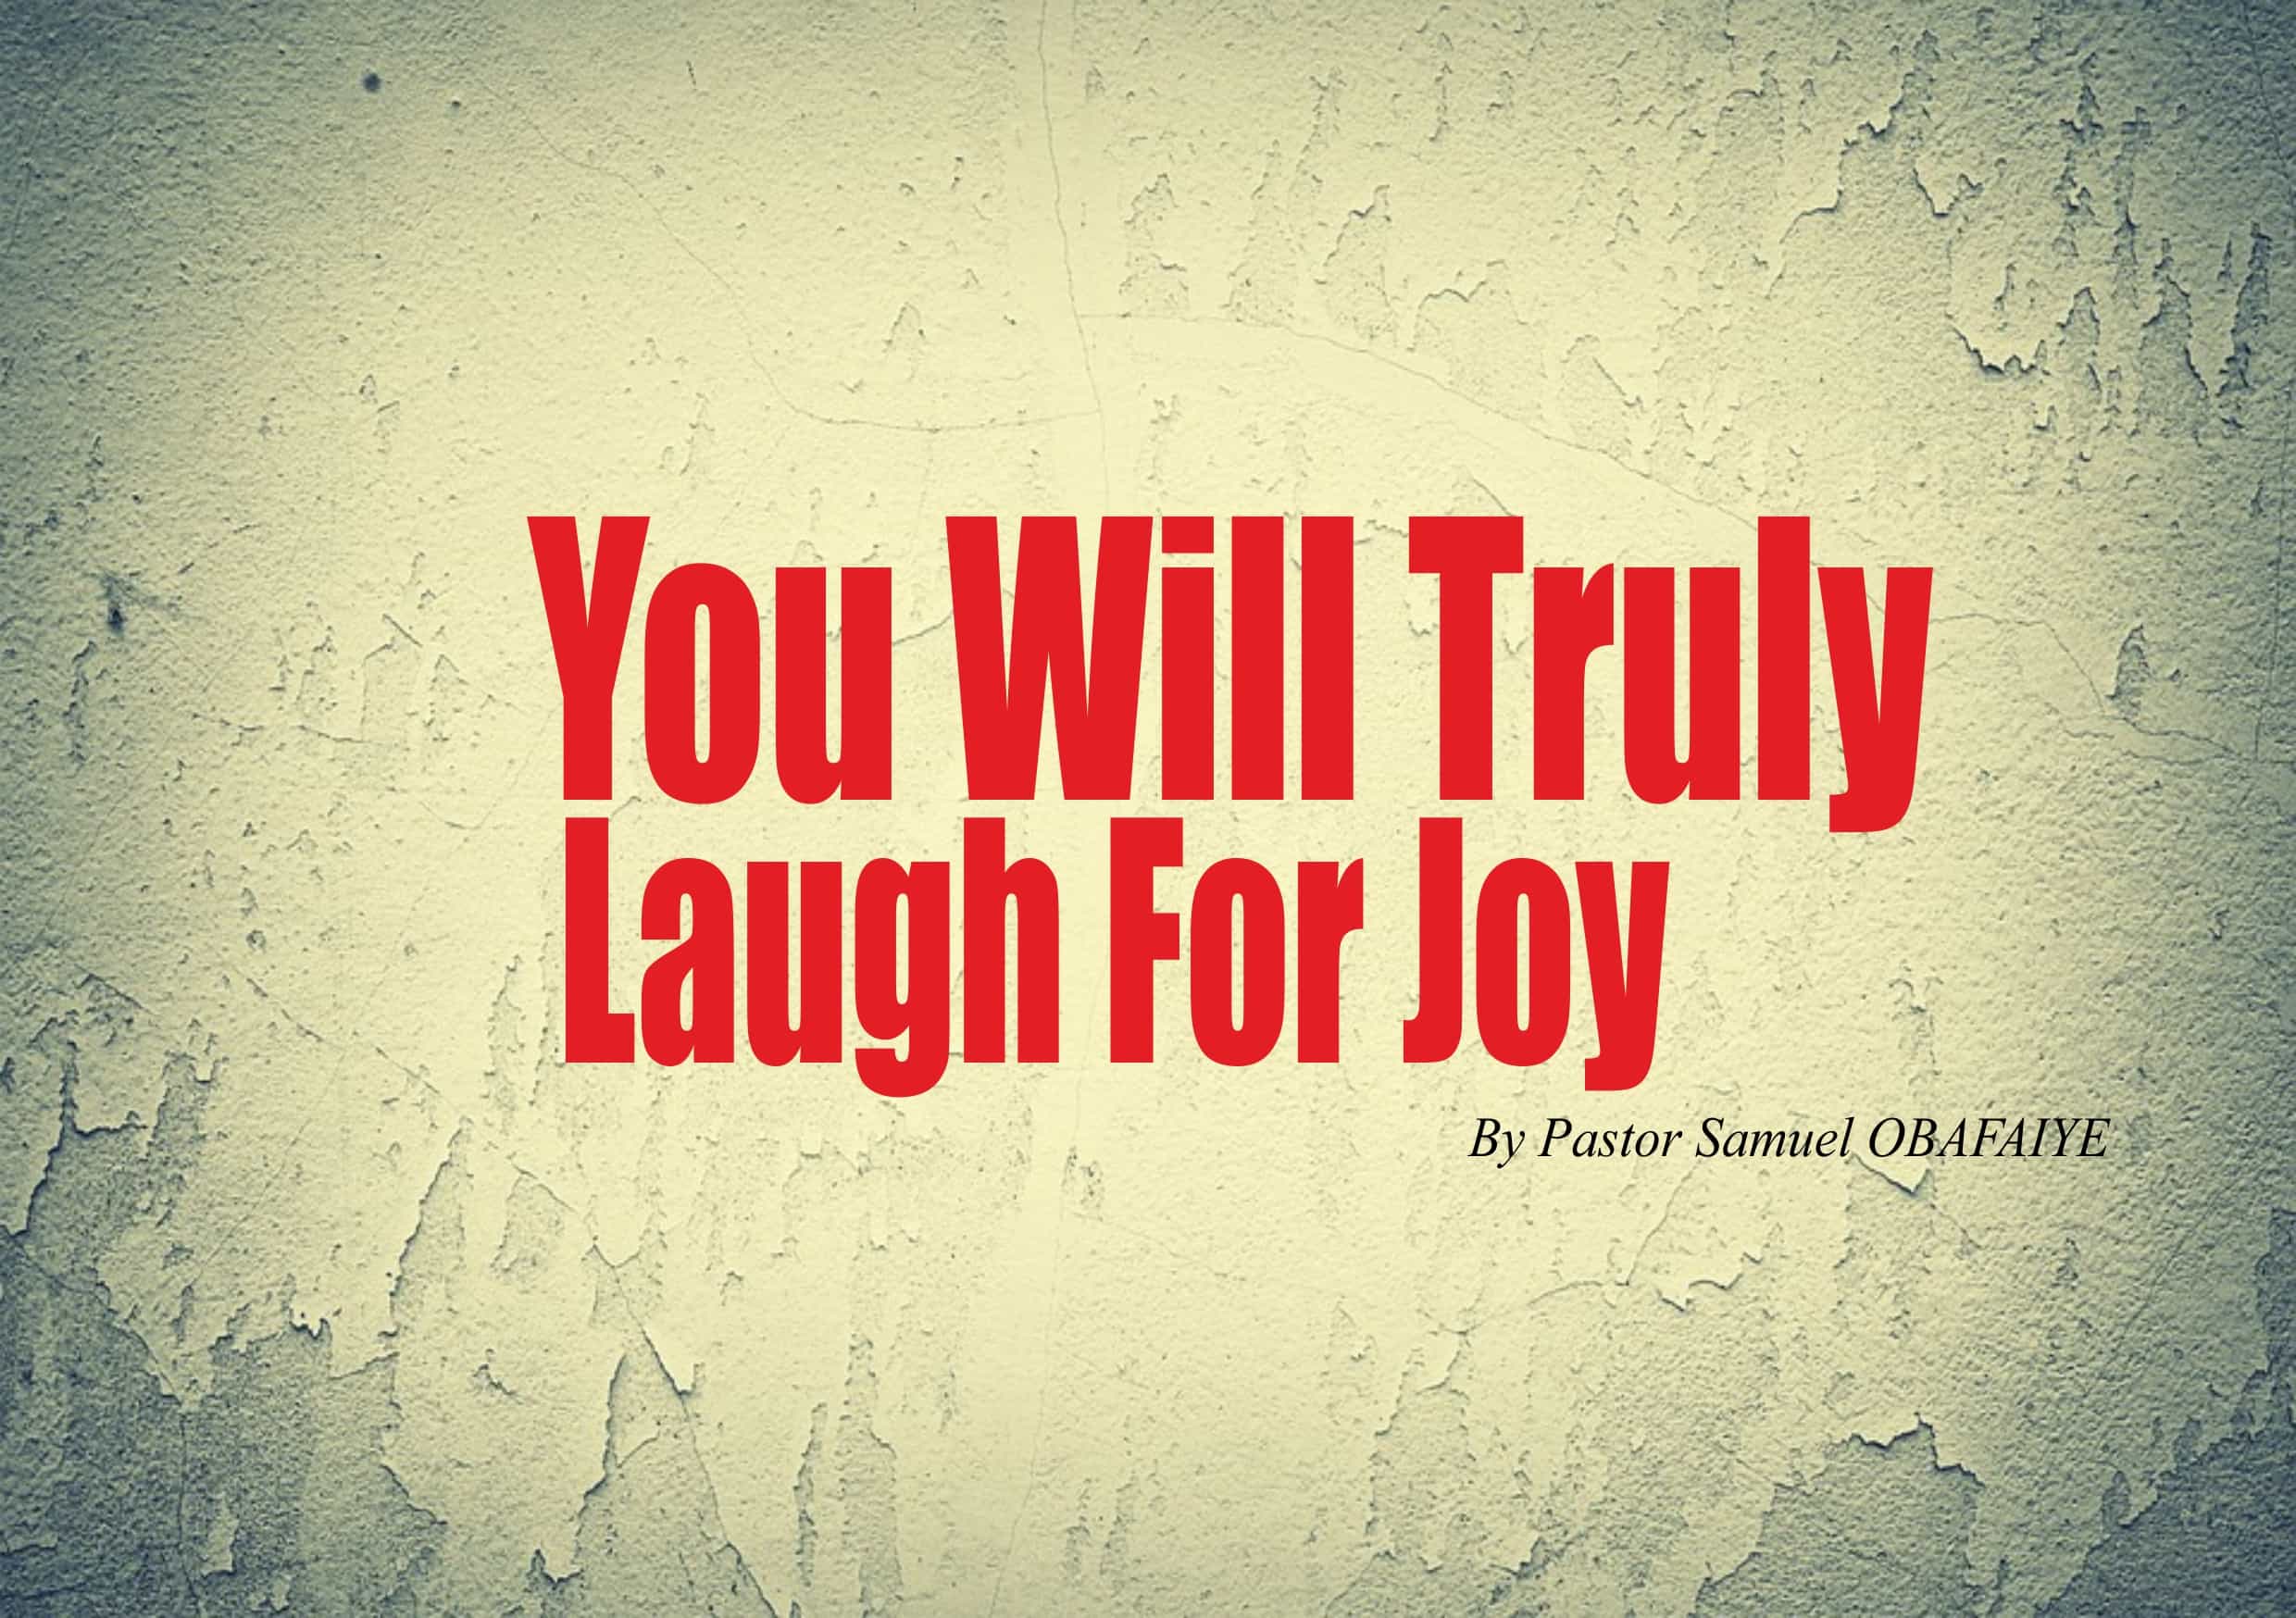 You Will Truly Laugh For Joy, by Pastor Samuel Obafaiye